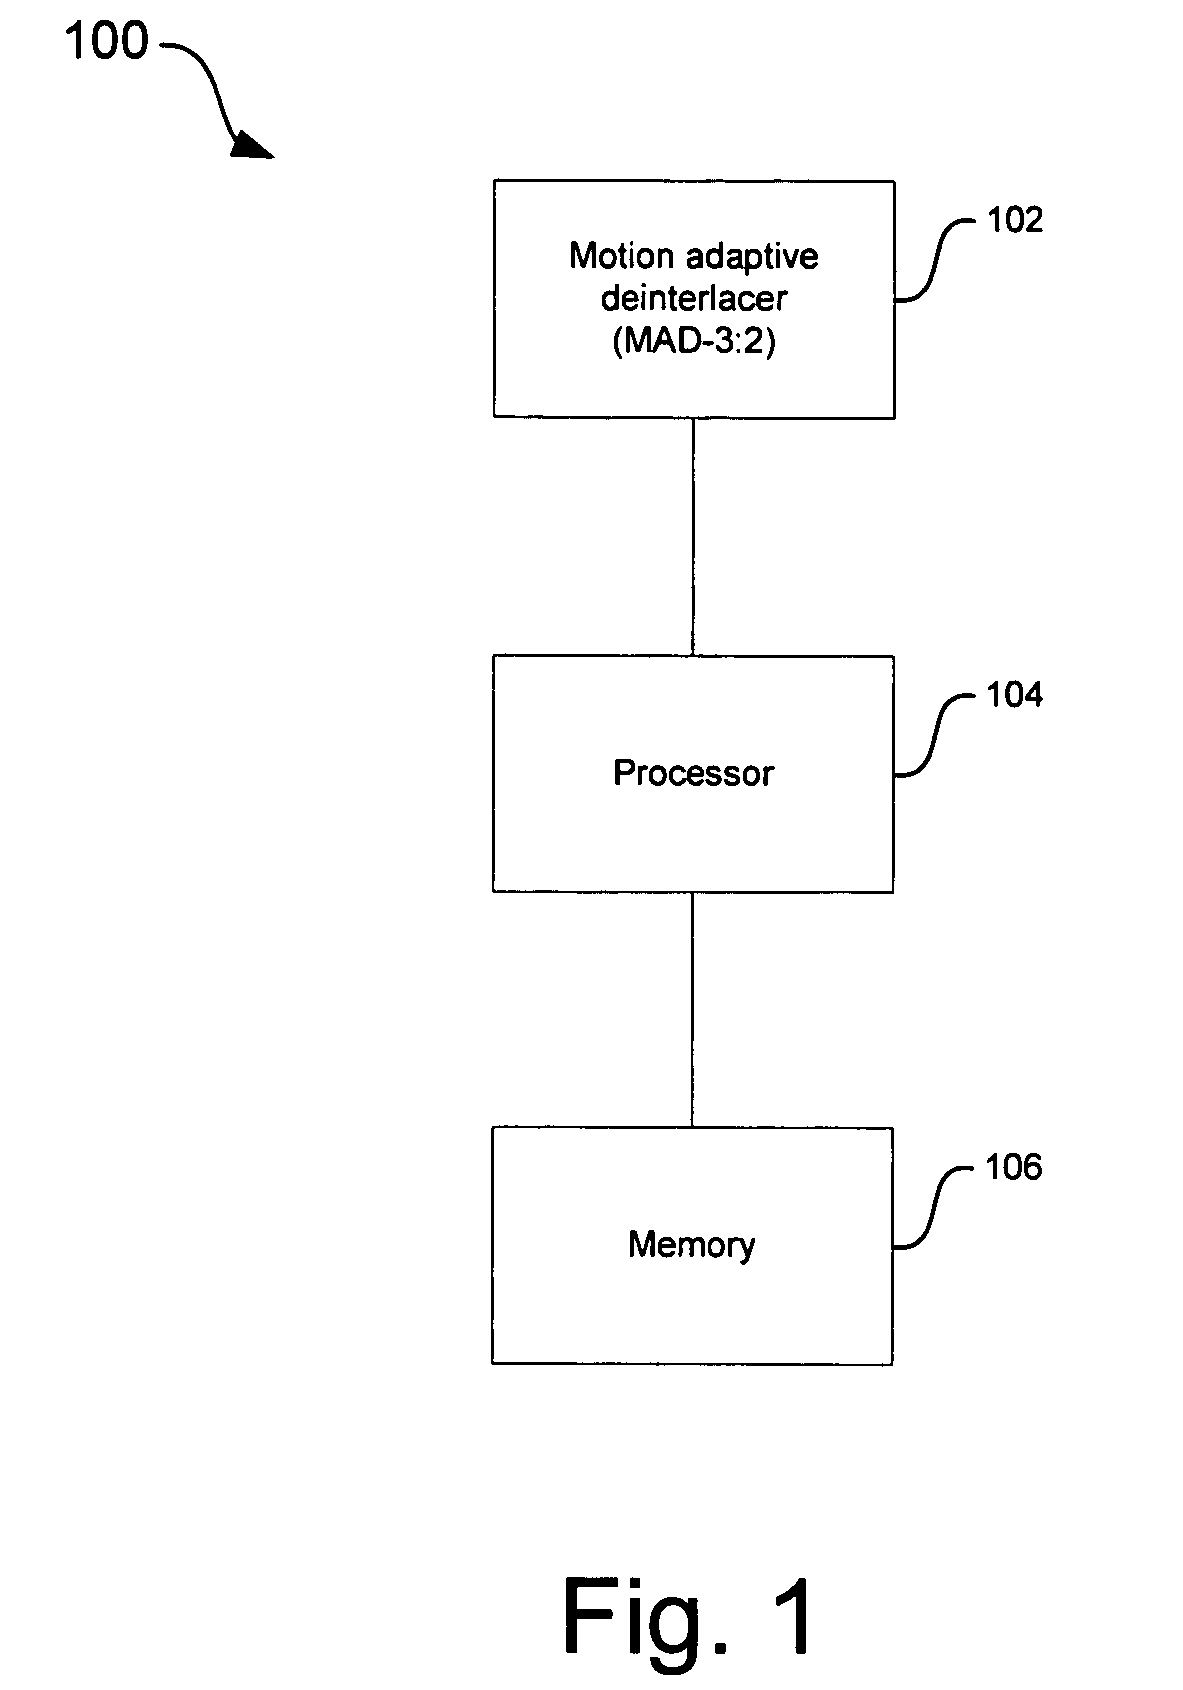 System and method for performing inverse telecine deinterlacing of video by bypassing data present in vertical blanking intervals